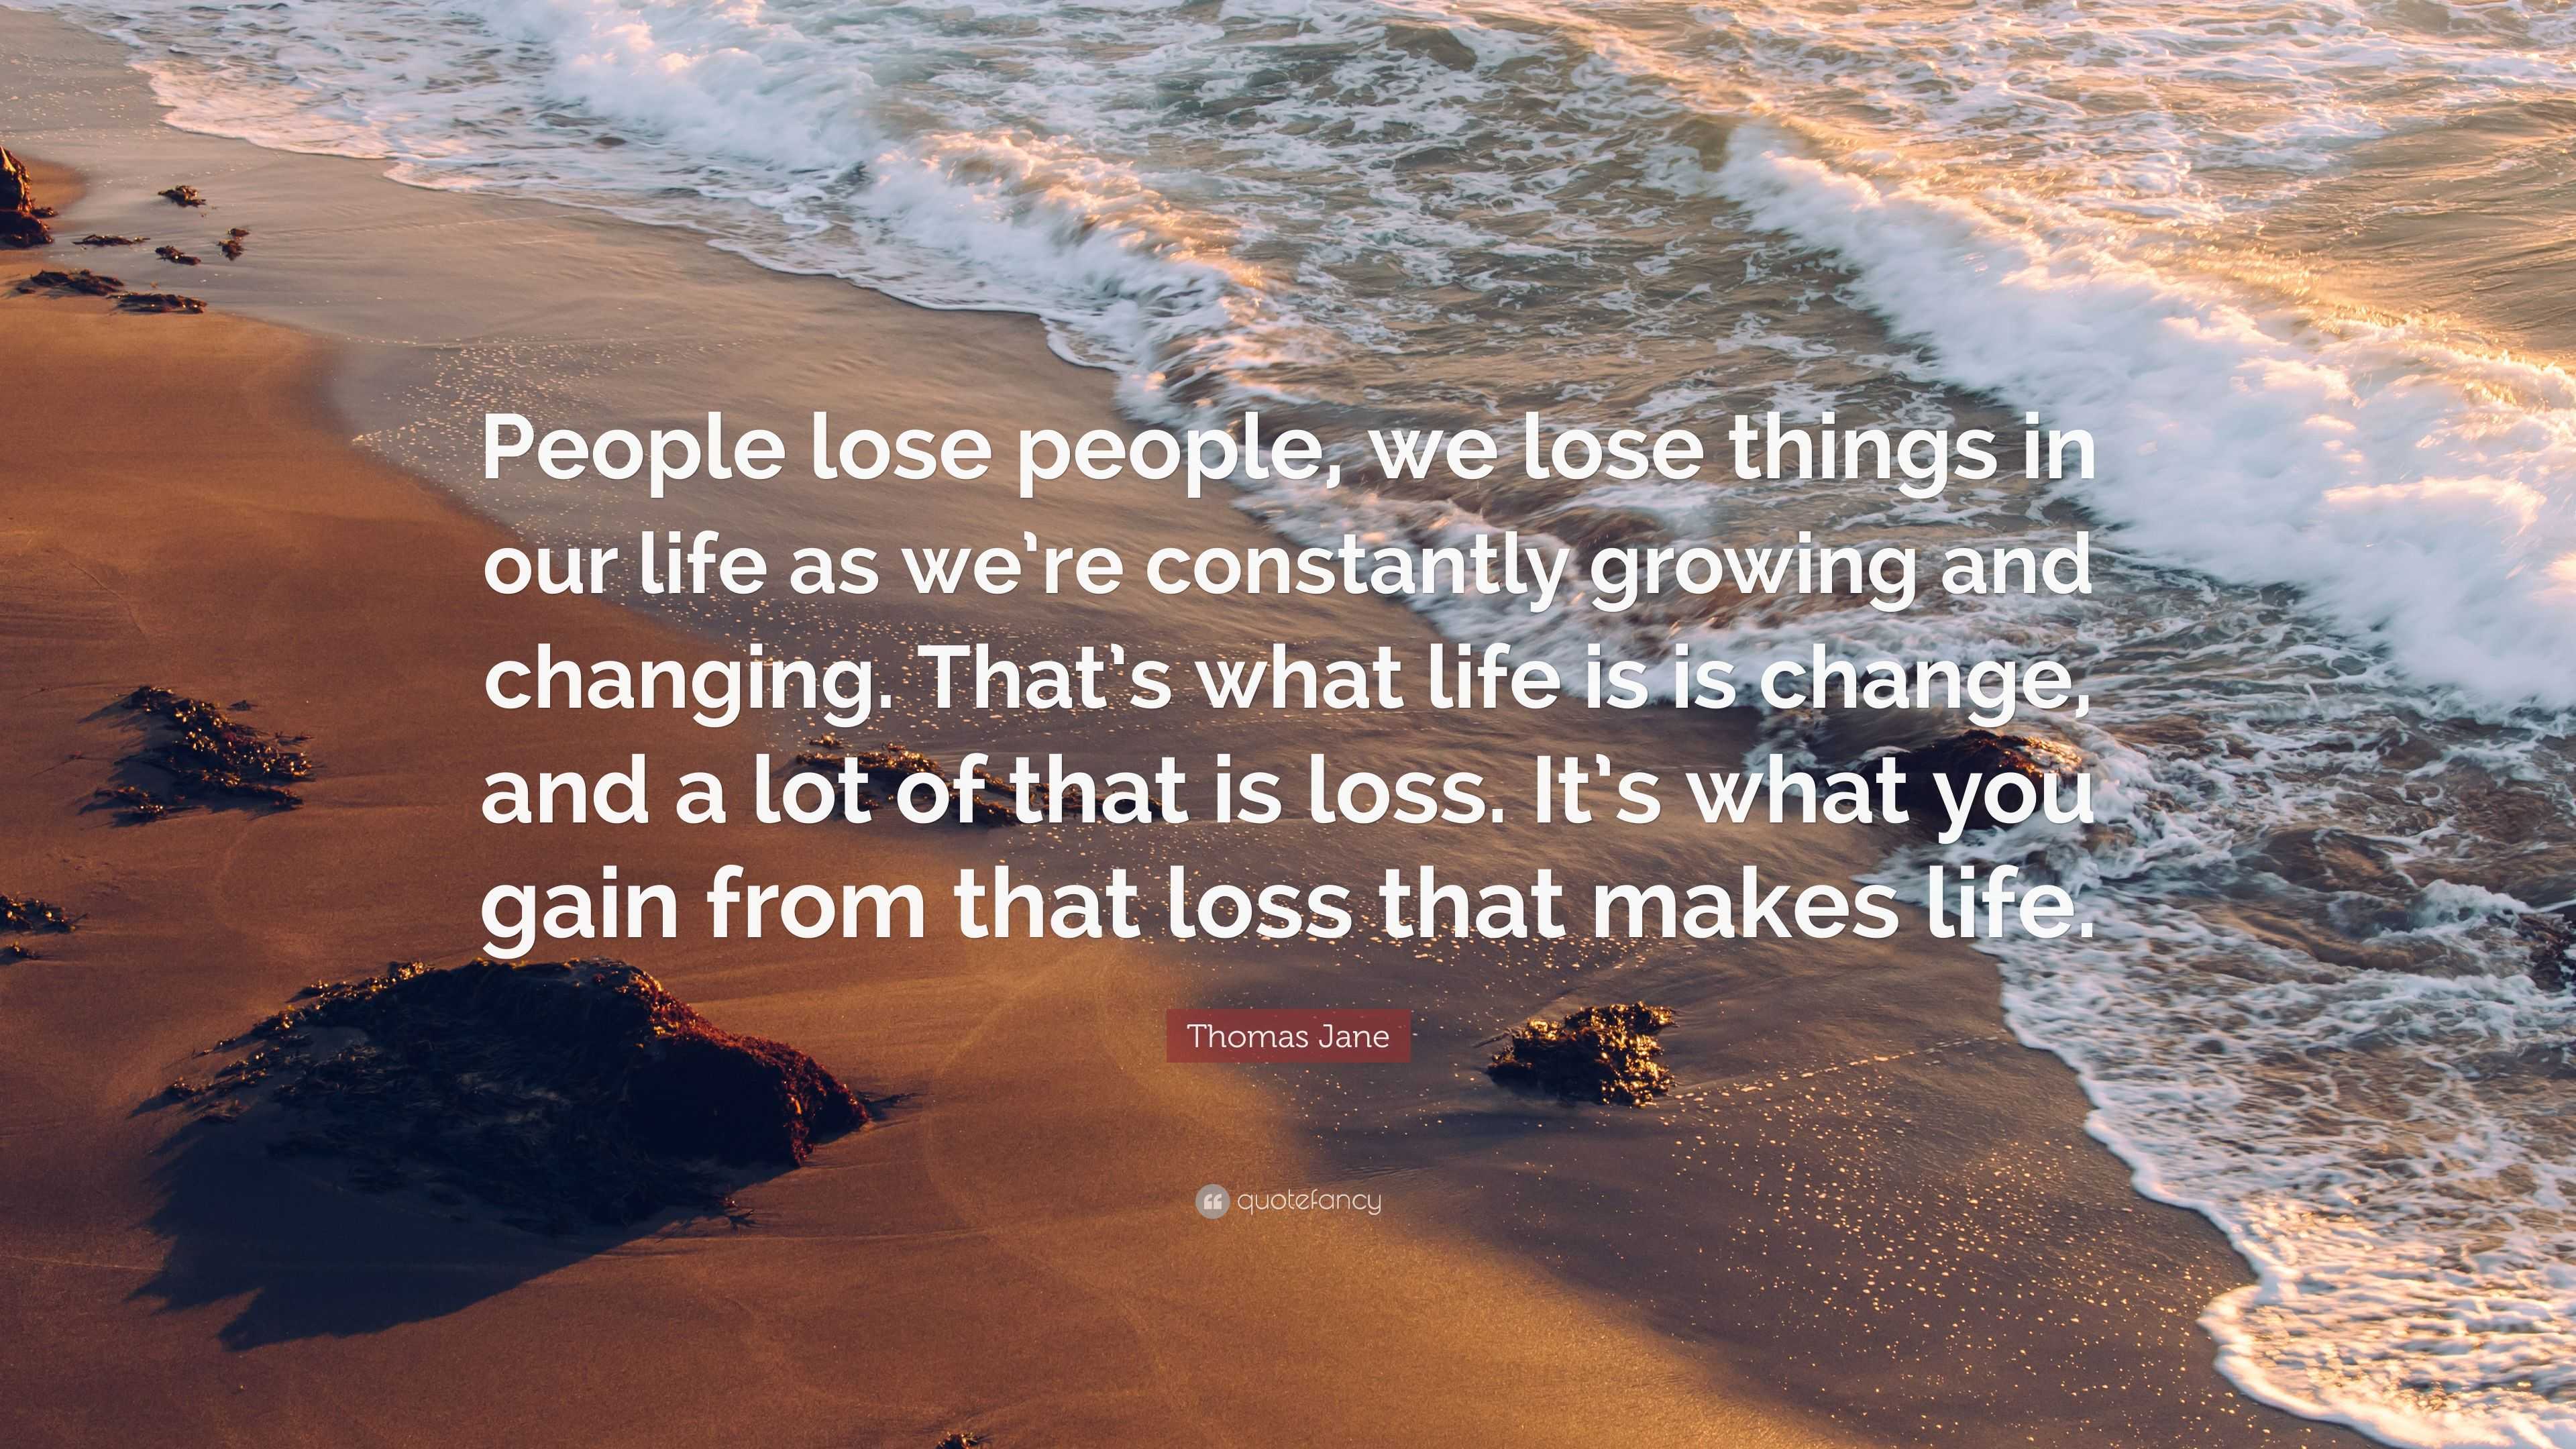 Thomas Jane Quote “People lose people we lose things in our life as